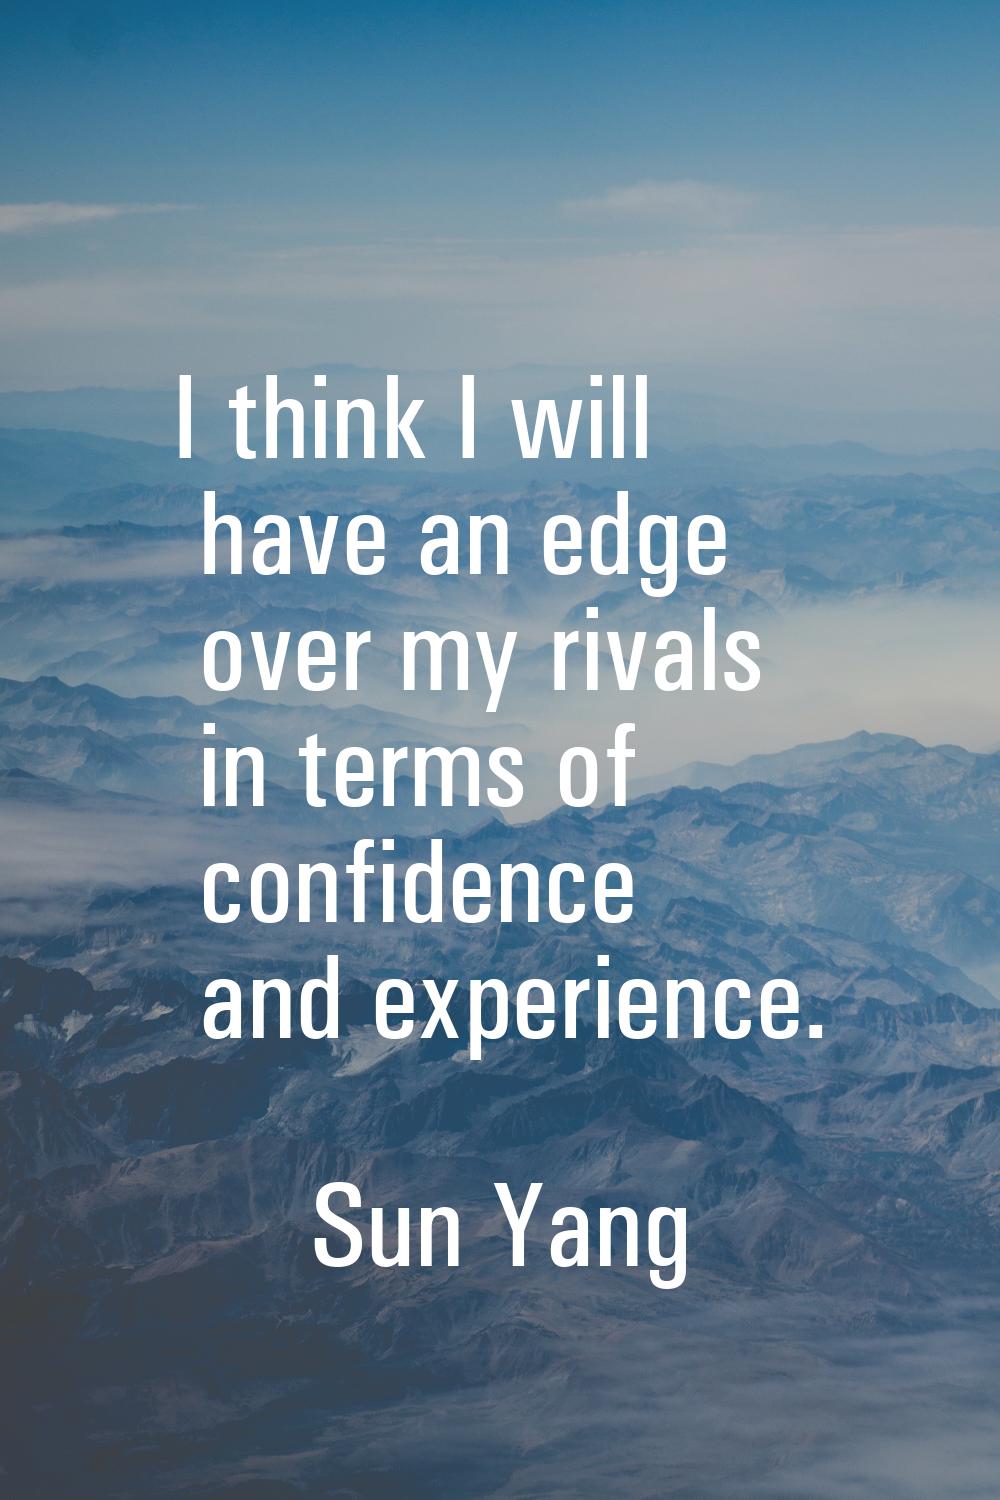 I think I will have an edge over my rivals in terms of confidence and experience.